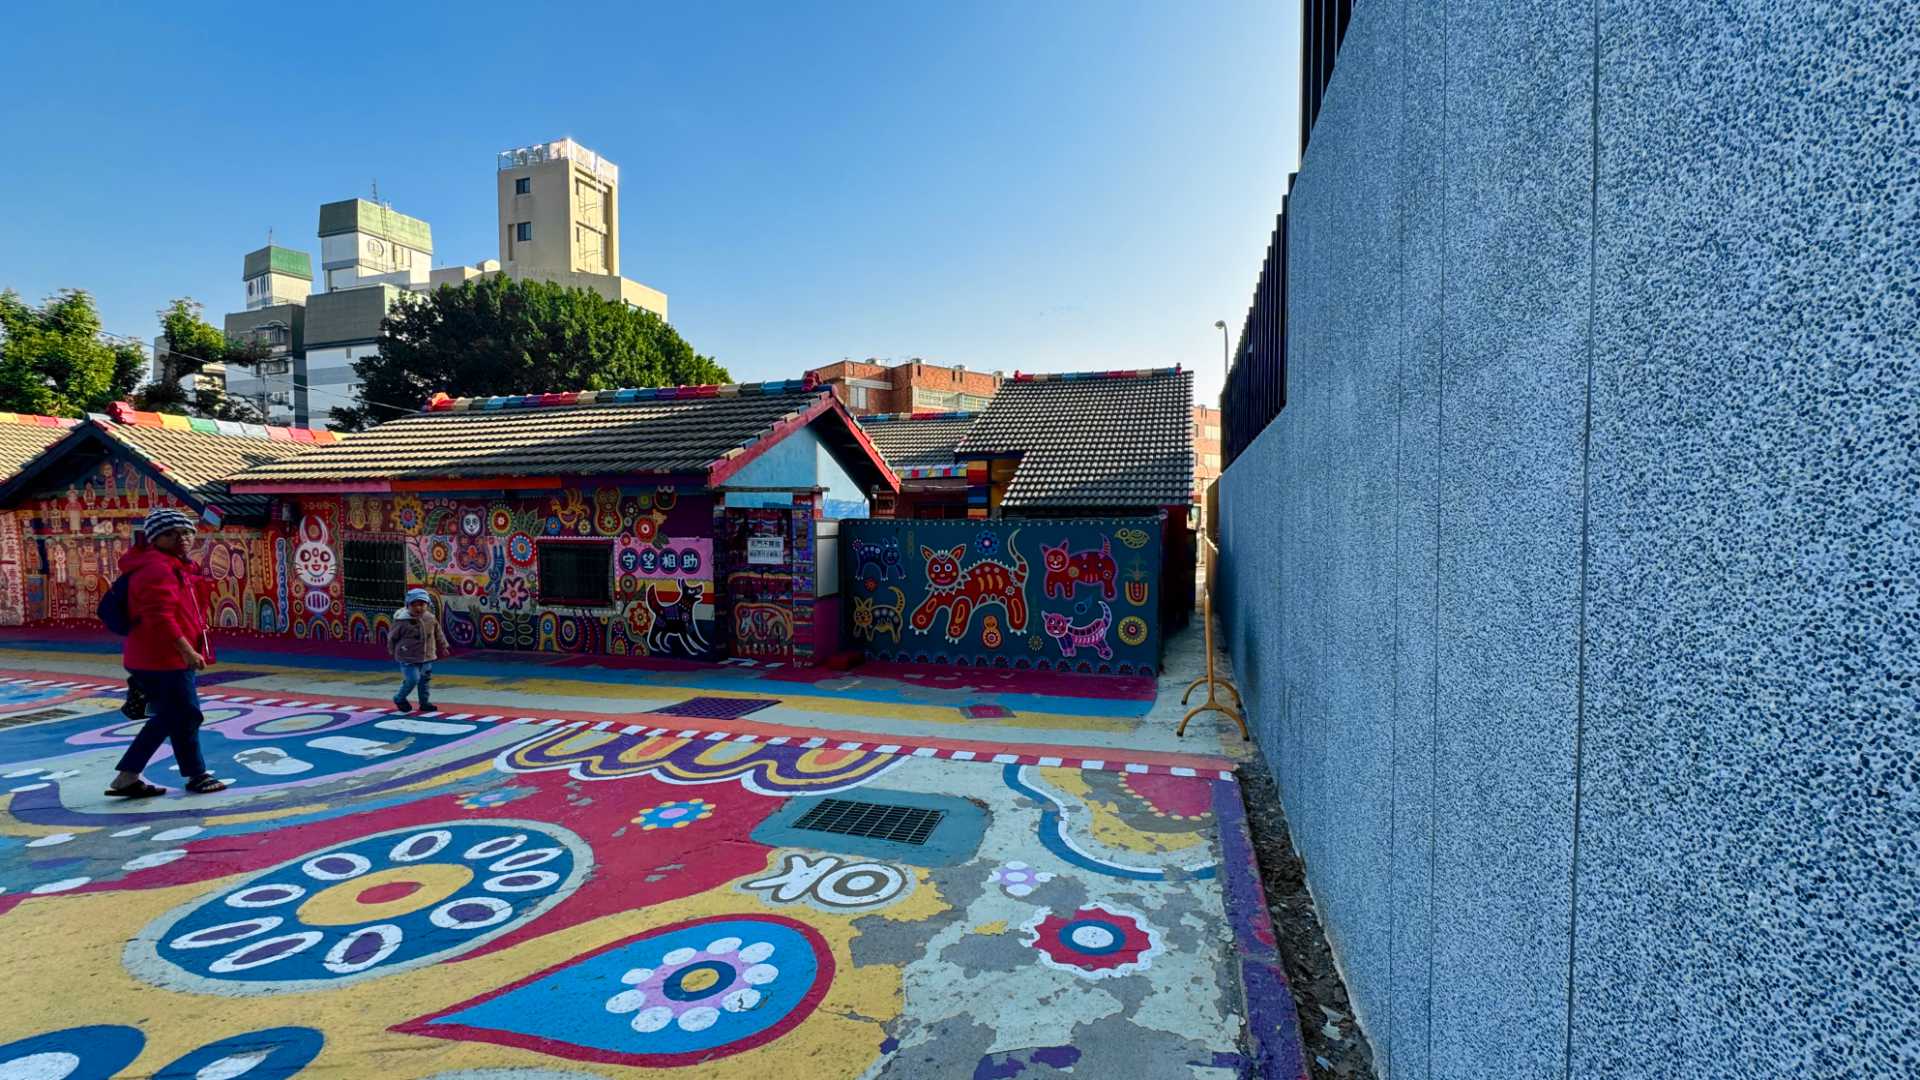 The forecourt of Rainbow Village, shaded by a new gray concrete wall on the right.